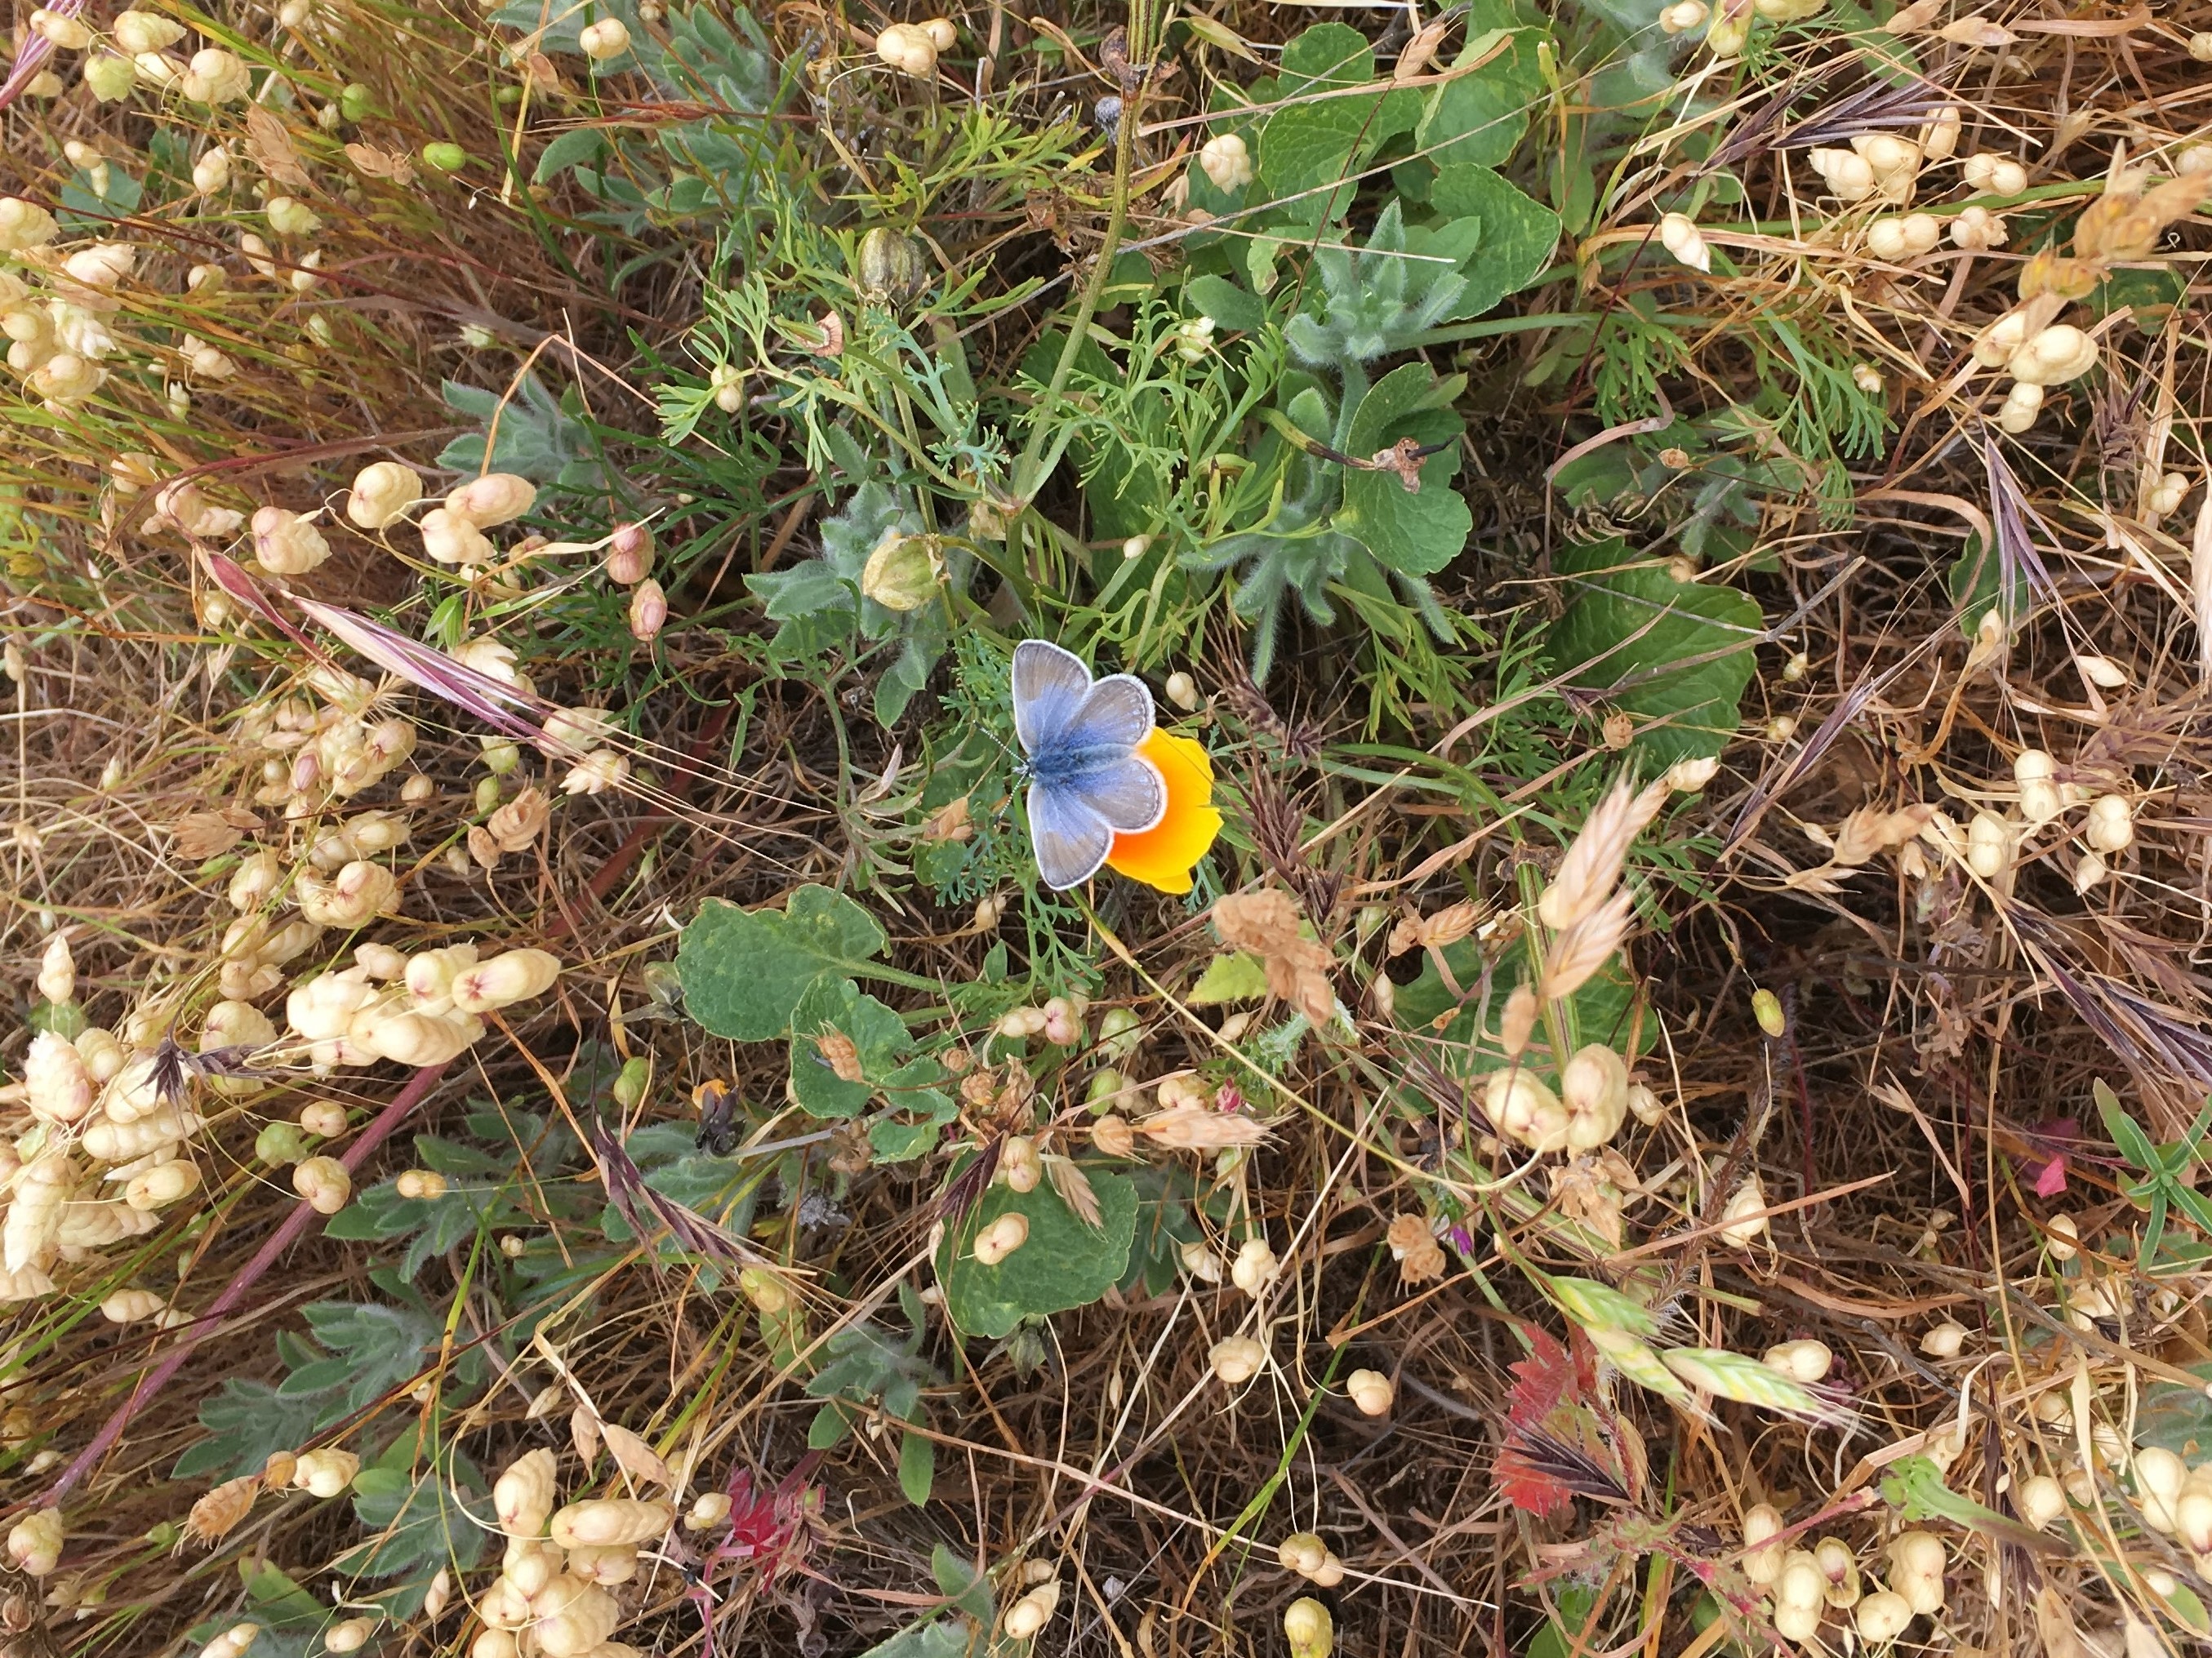 A small light blue butterfly sits on an orange flower.